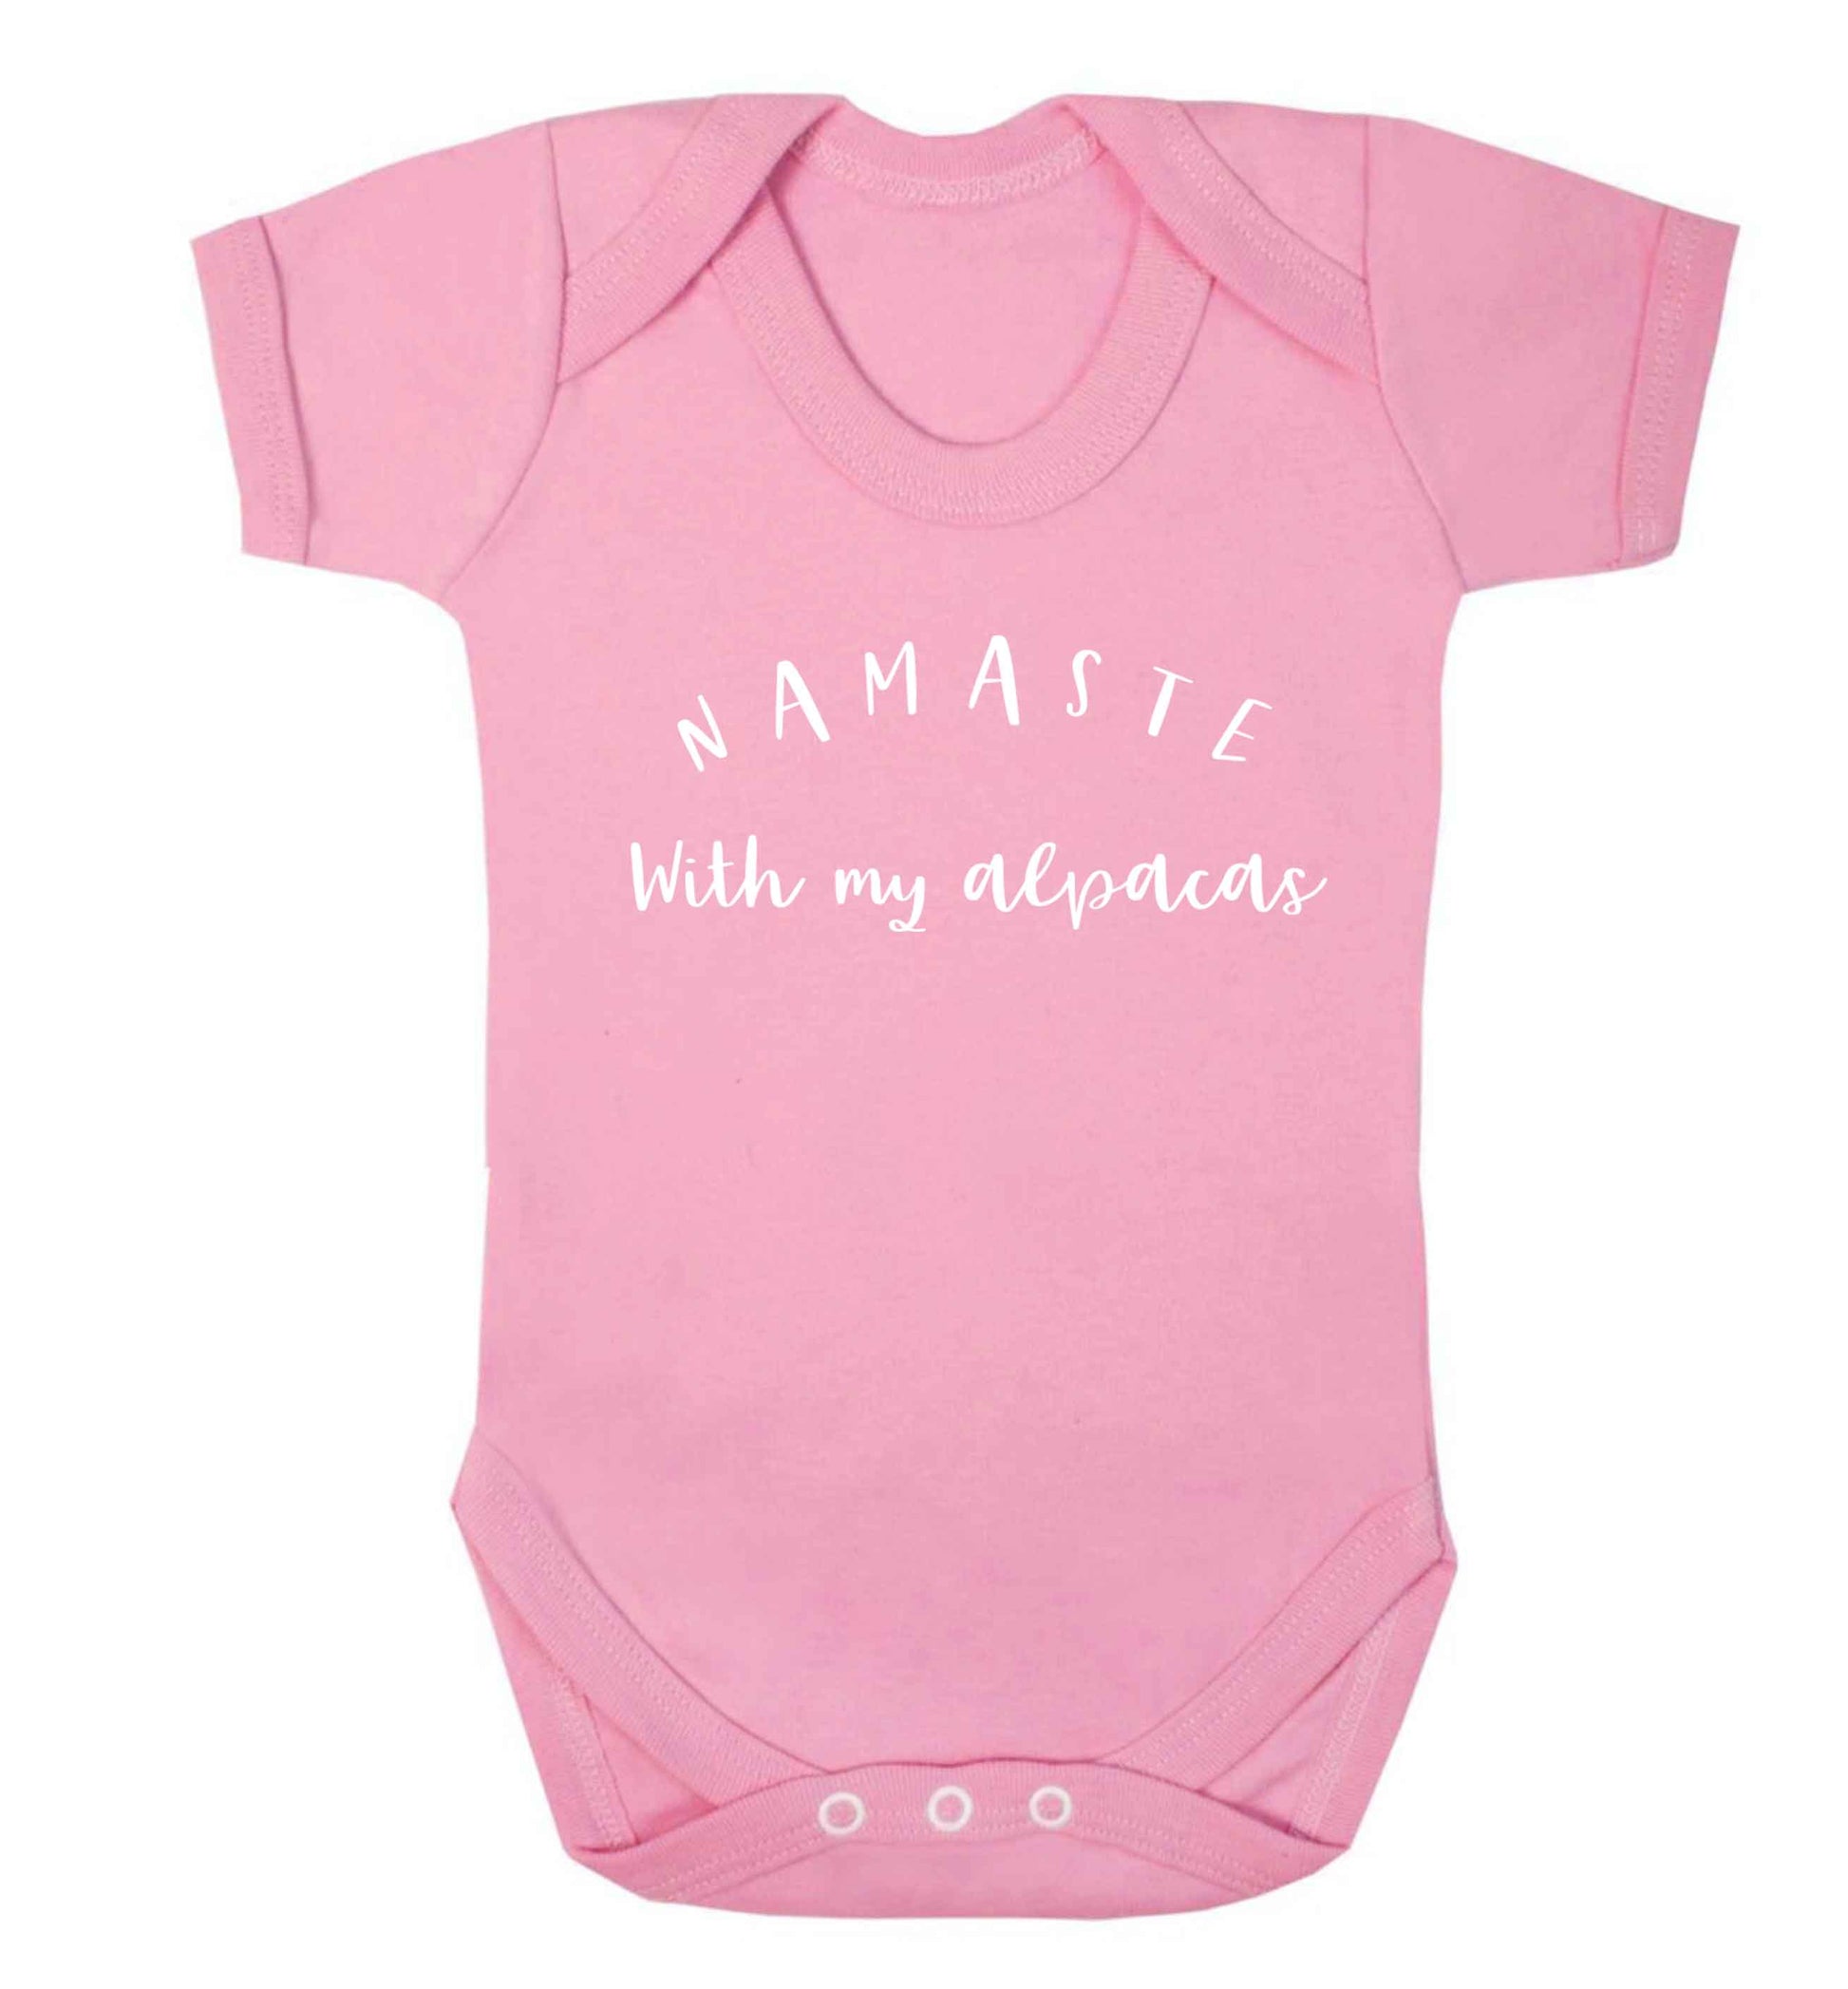 Namaste with my alpacas Baby Vest pale pink 18-24 months